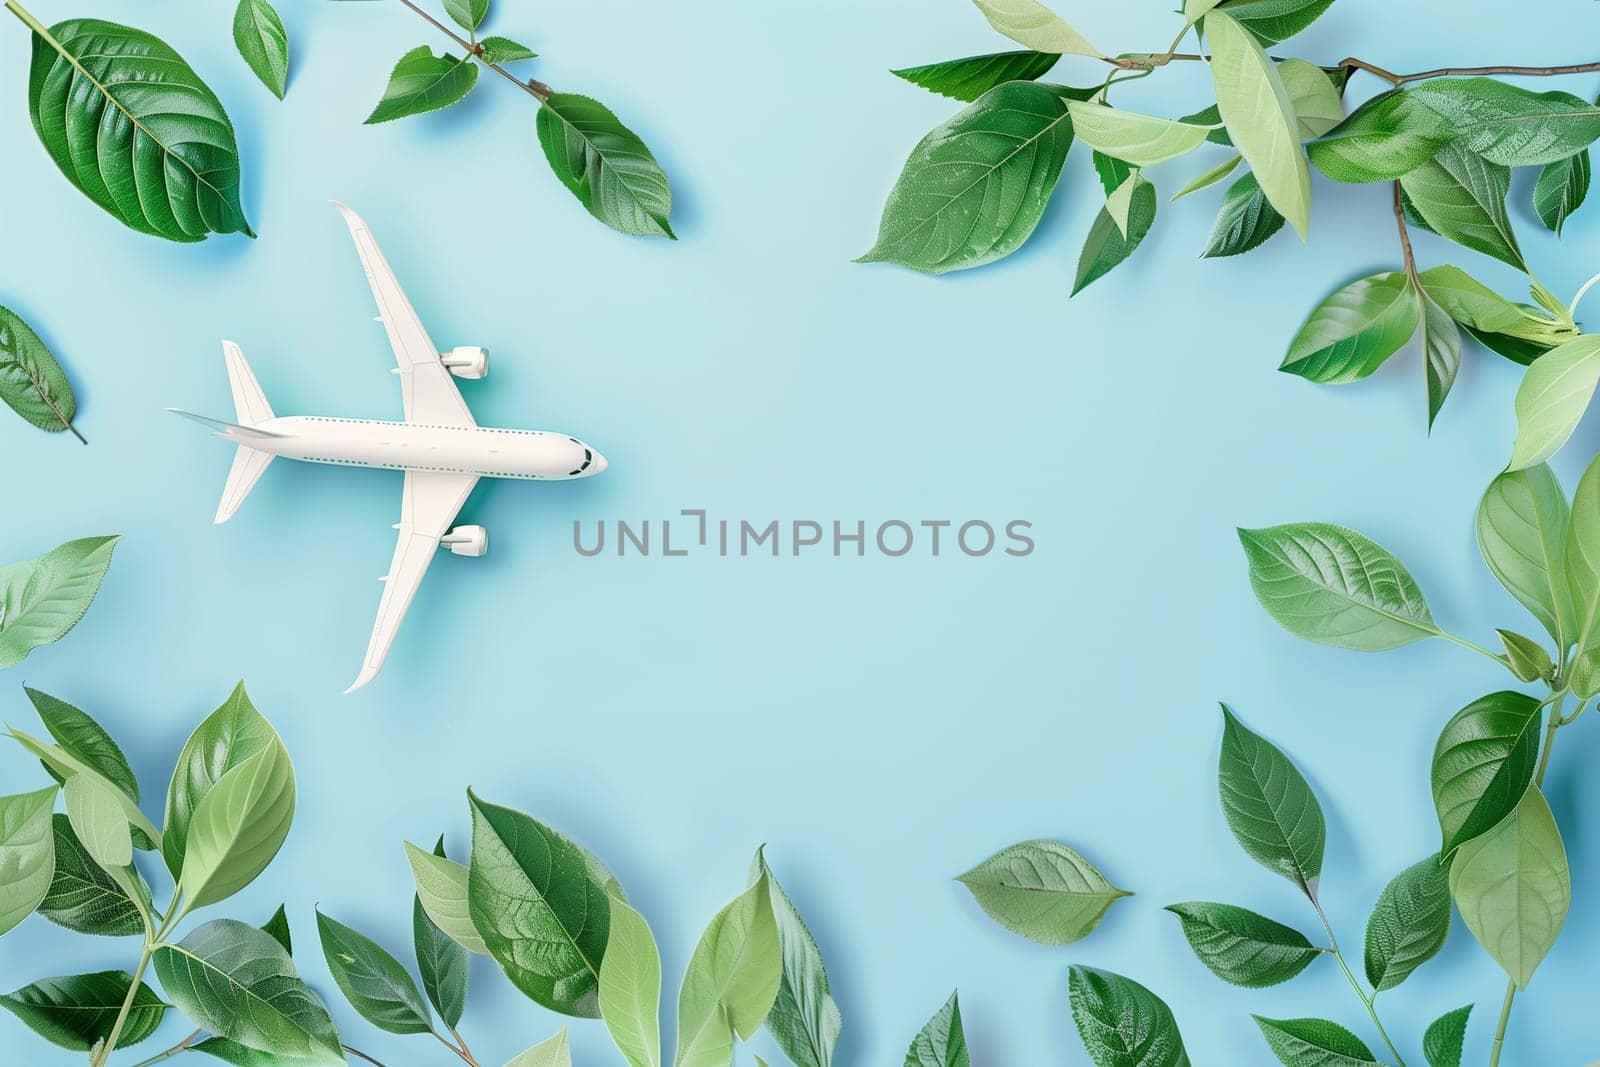 Sustainable Travel Concept With Green Leaves and Airplane Model on Blue Background by Sd28DimoN_1976